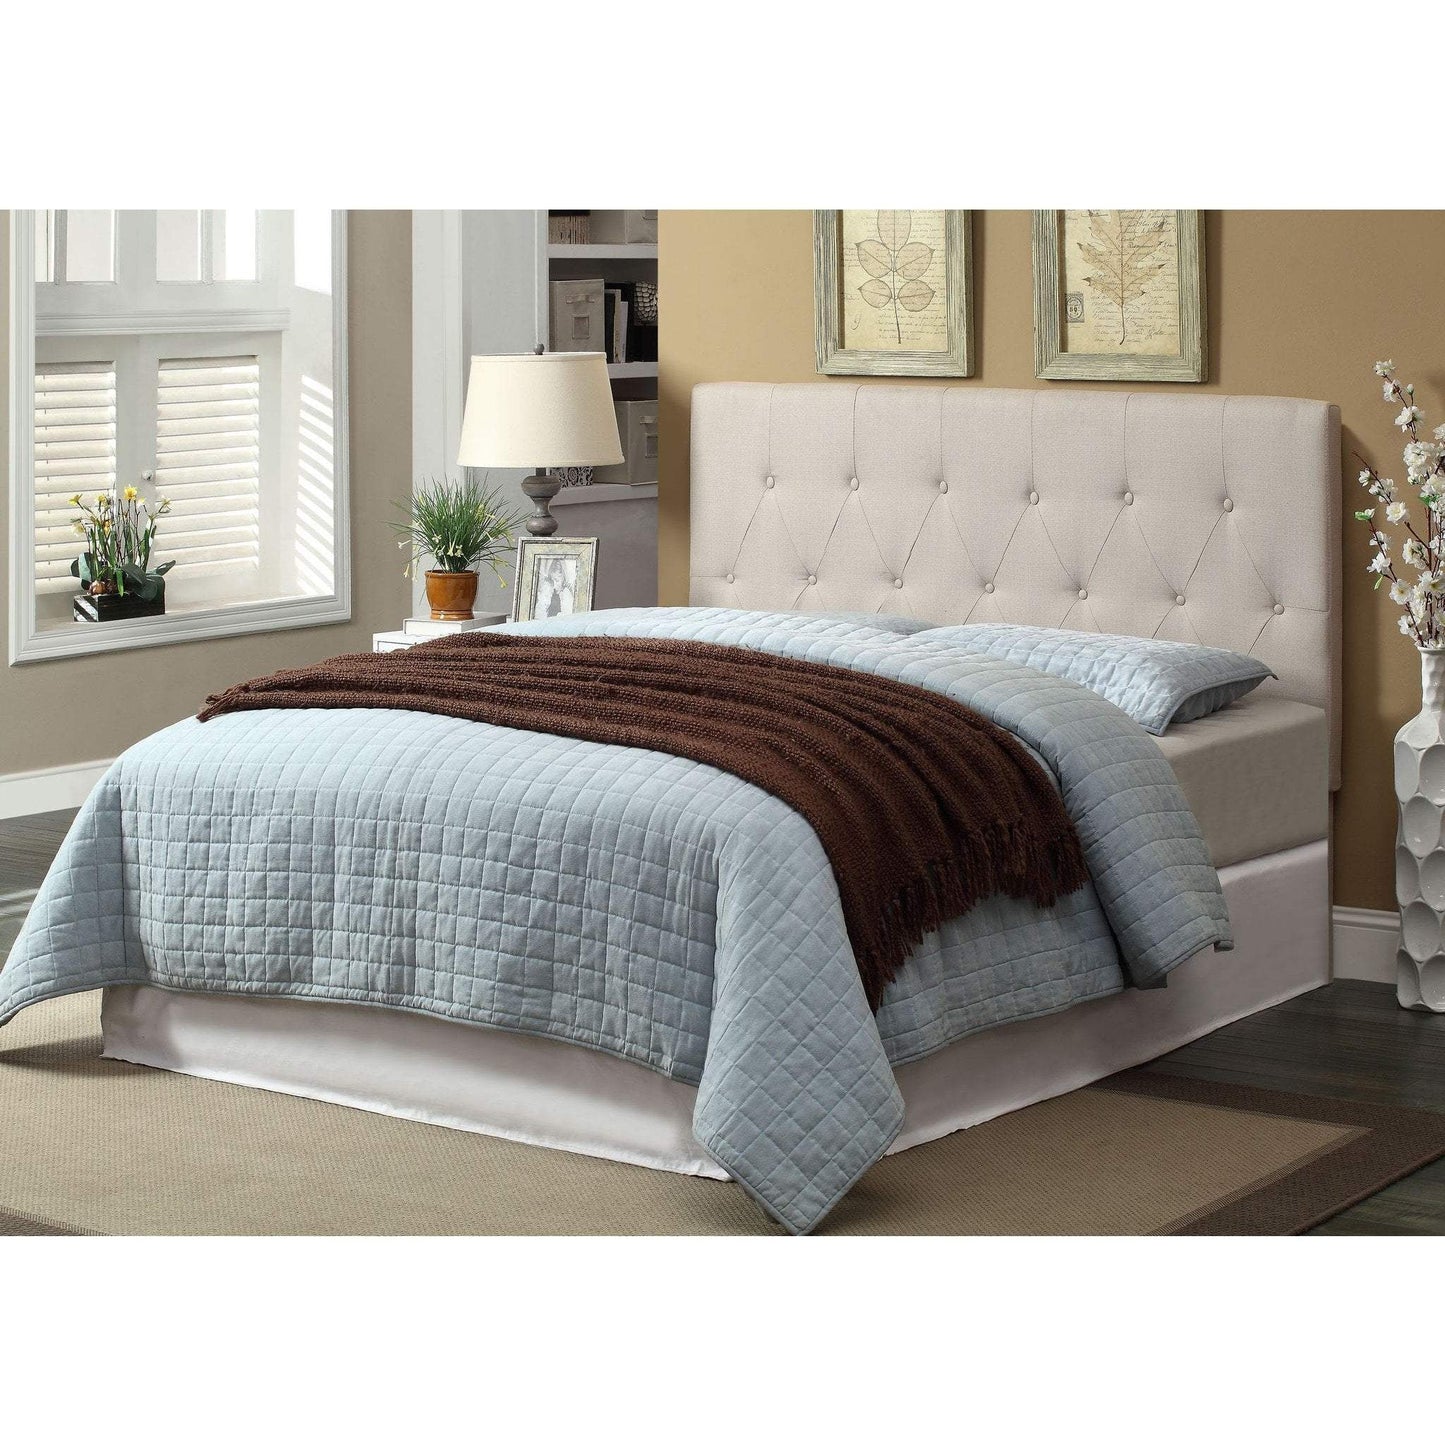 Furniture of America Bed Eastern King Valdimar Contemporary Tufted Fabric Cal. King Platform Bed in Ivory